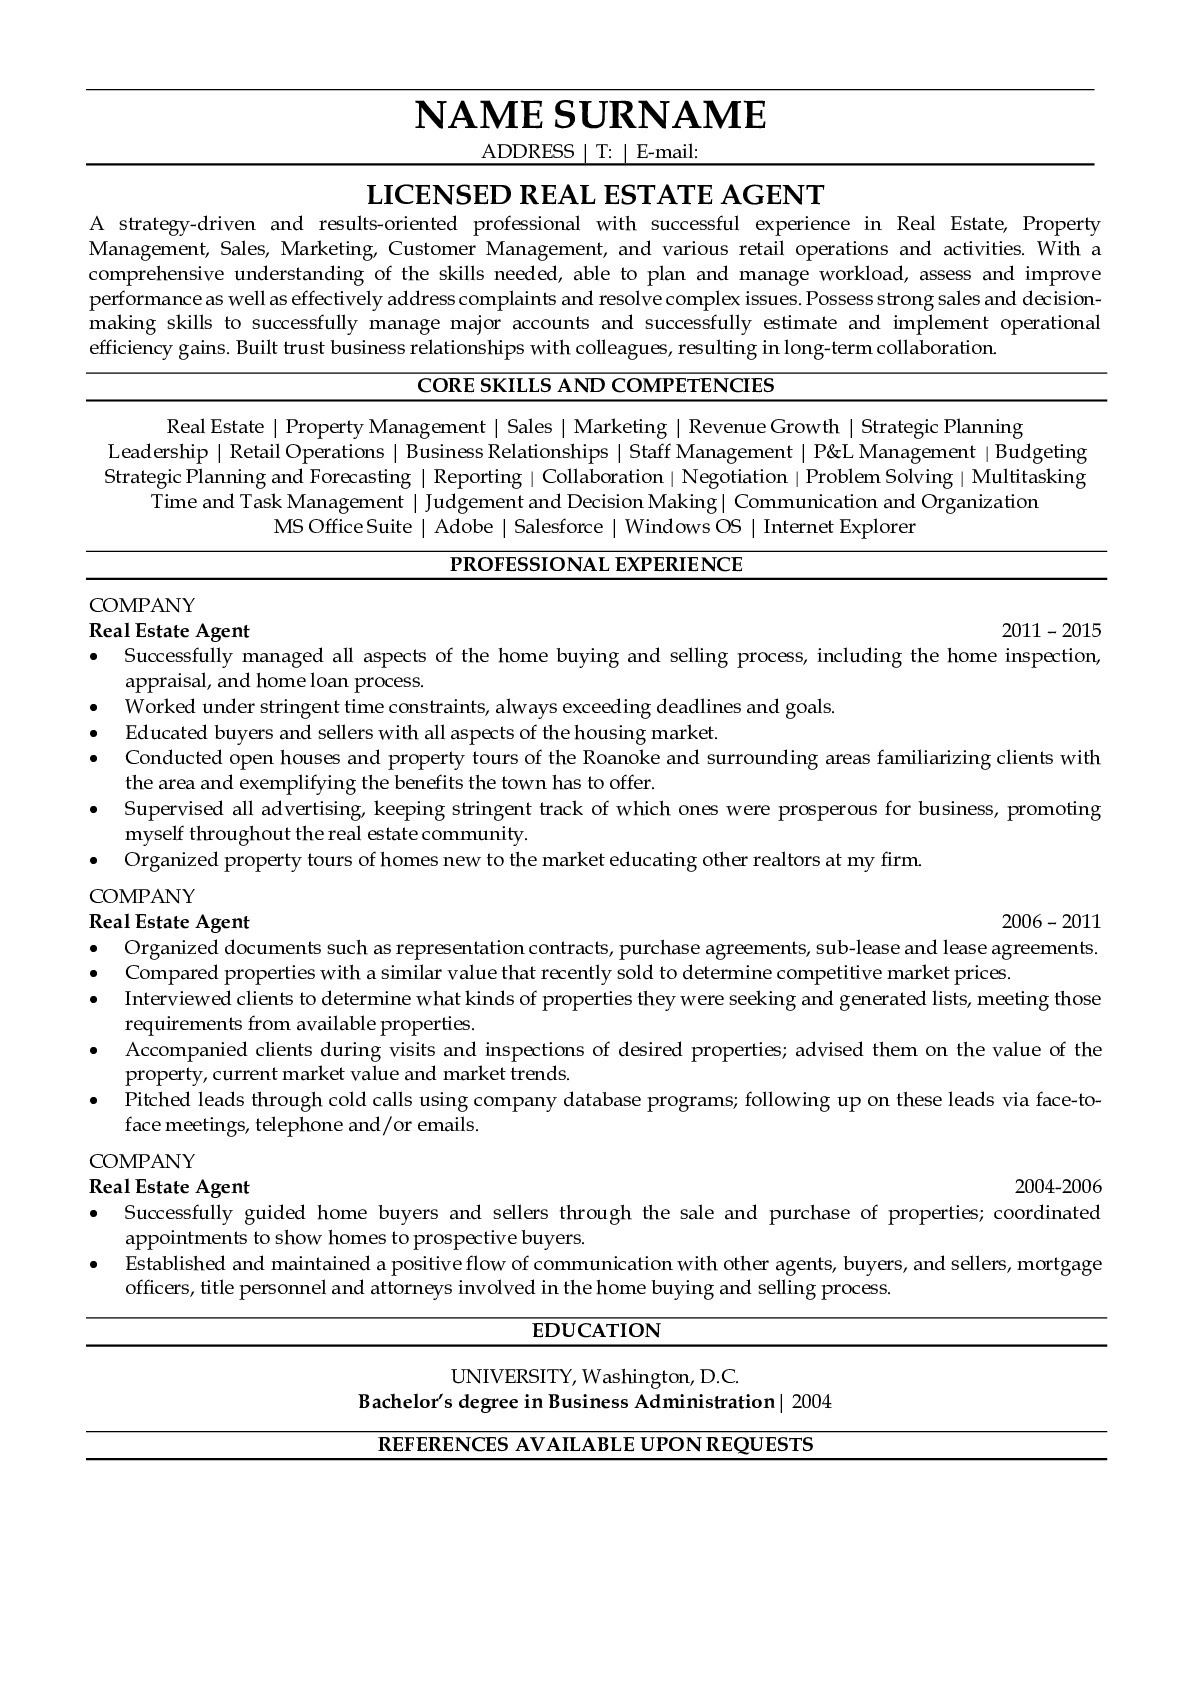 Resume Example for Real Estate Agent